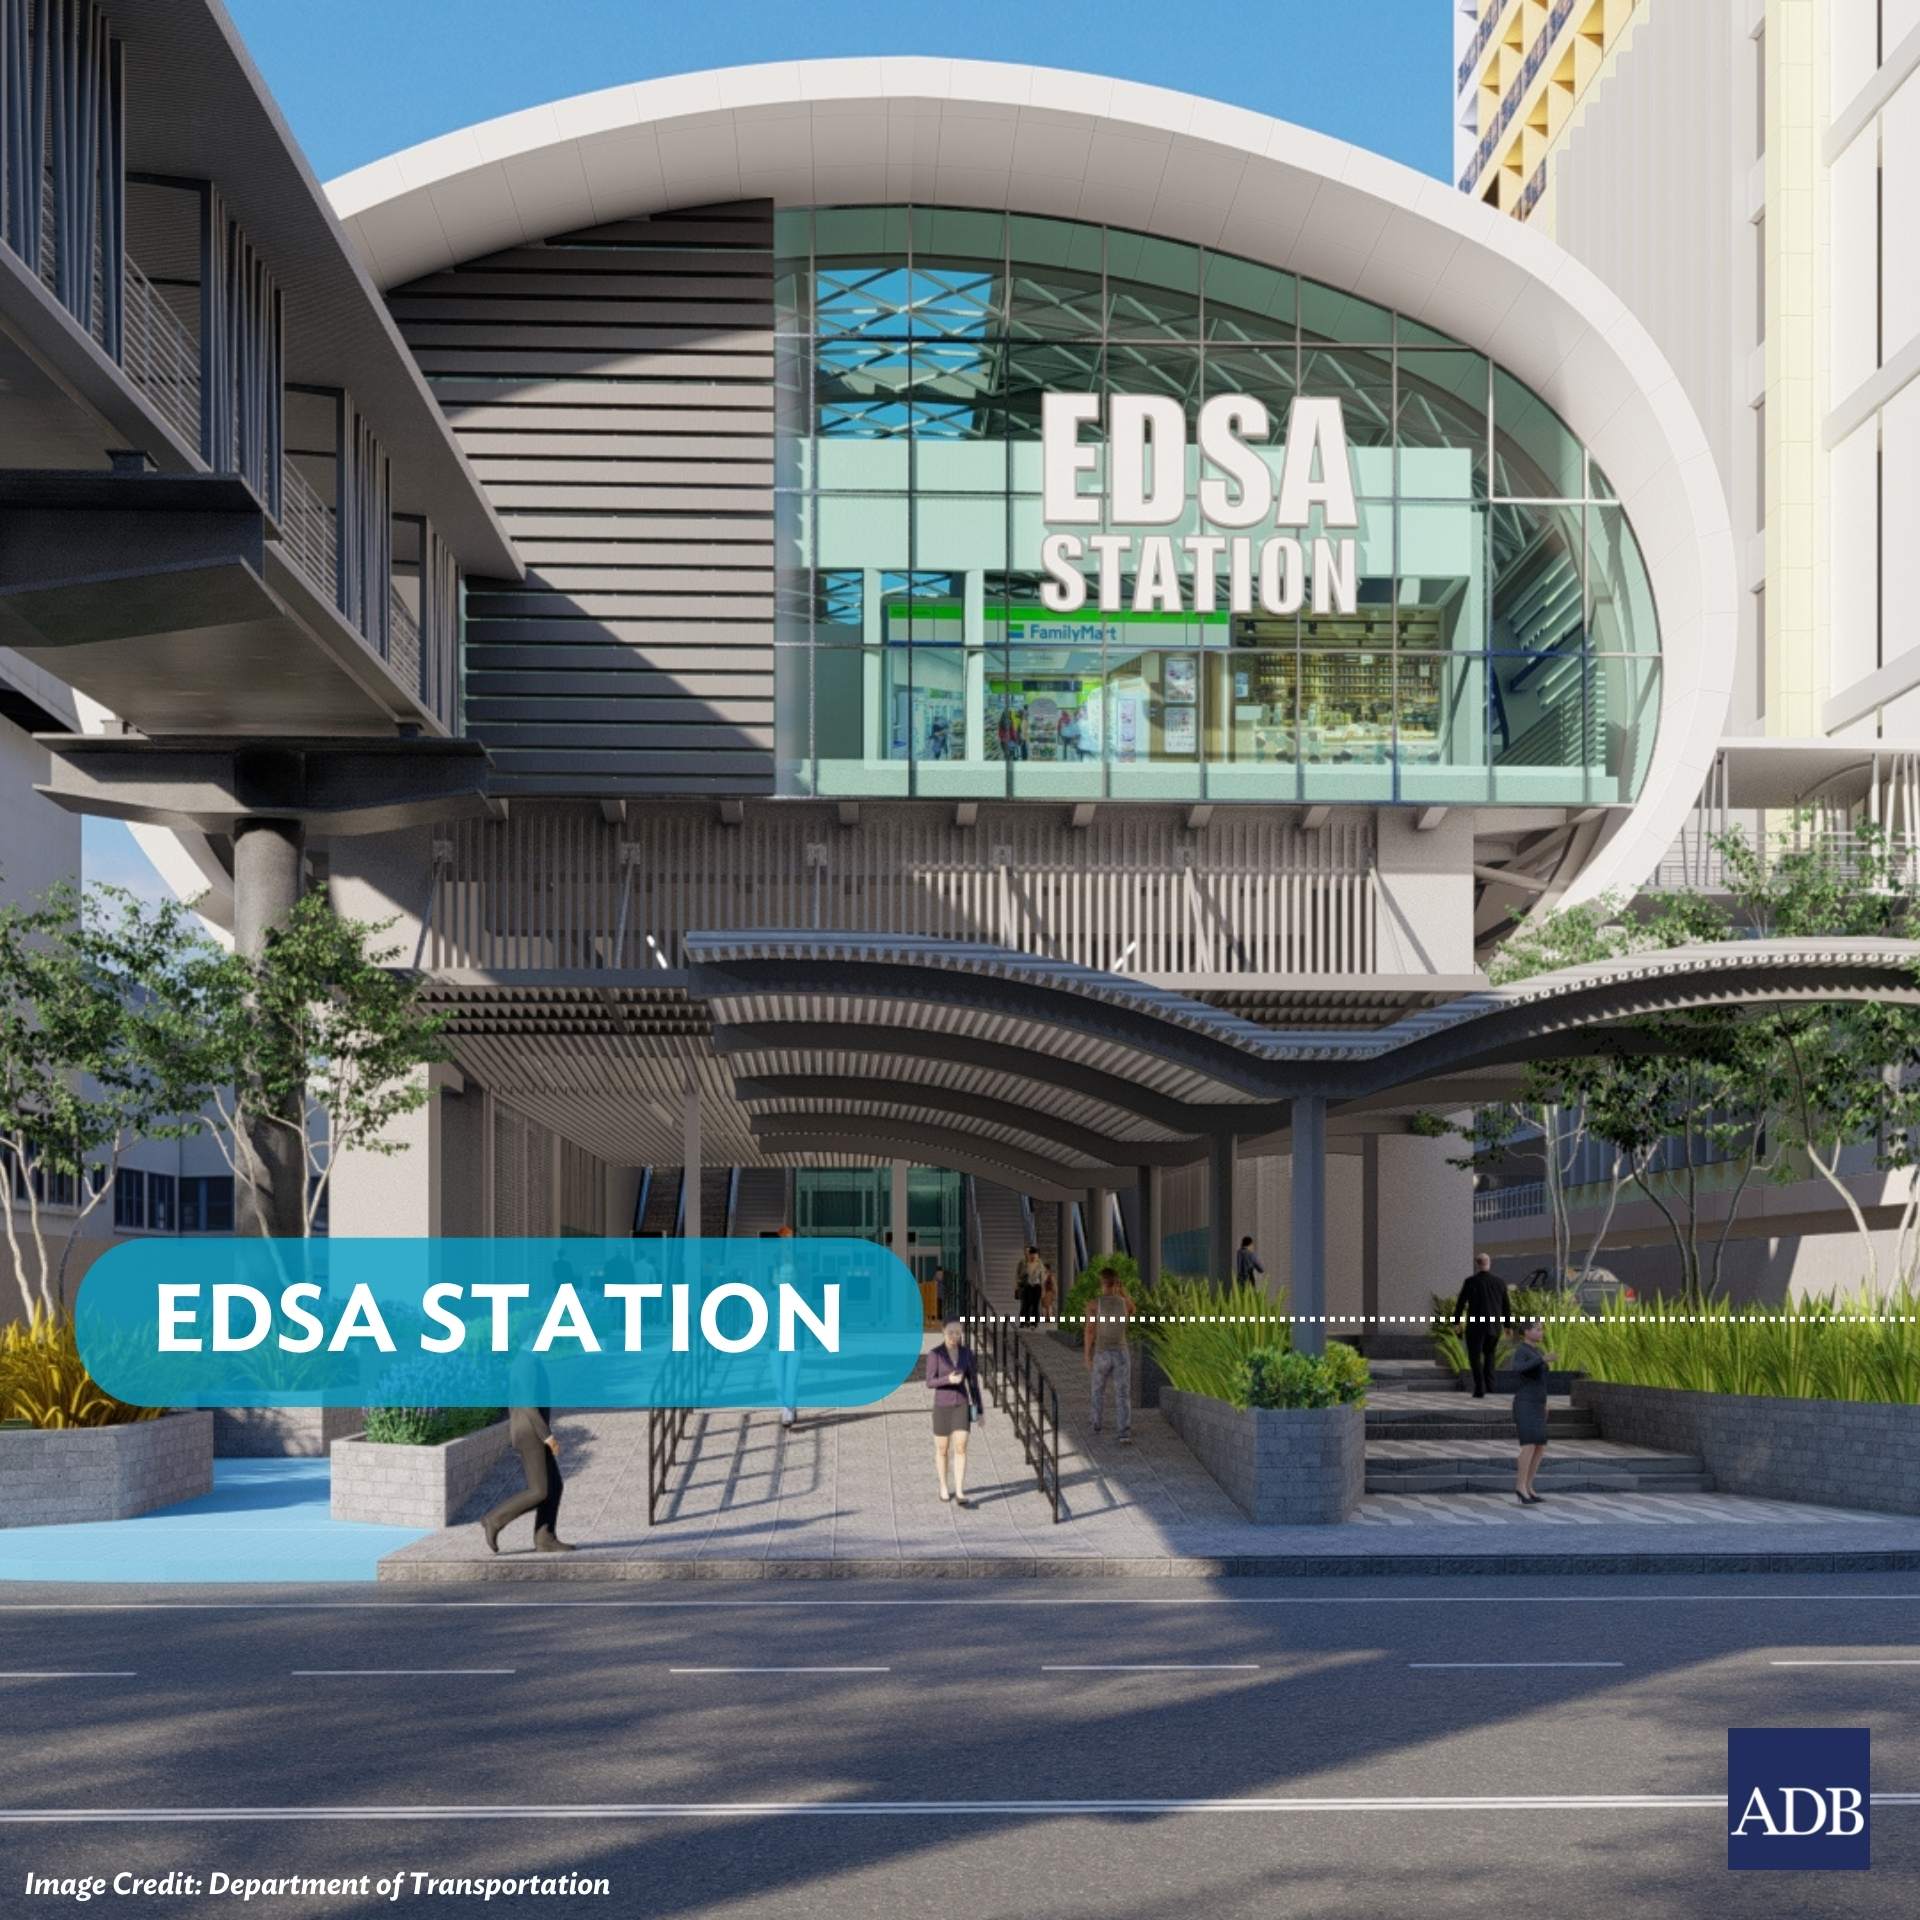 Look: South Commuter Railway stations look amazing!